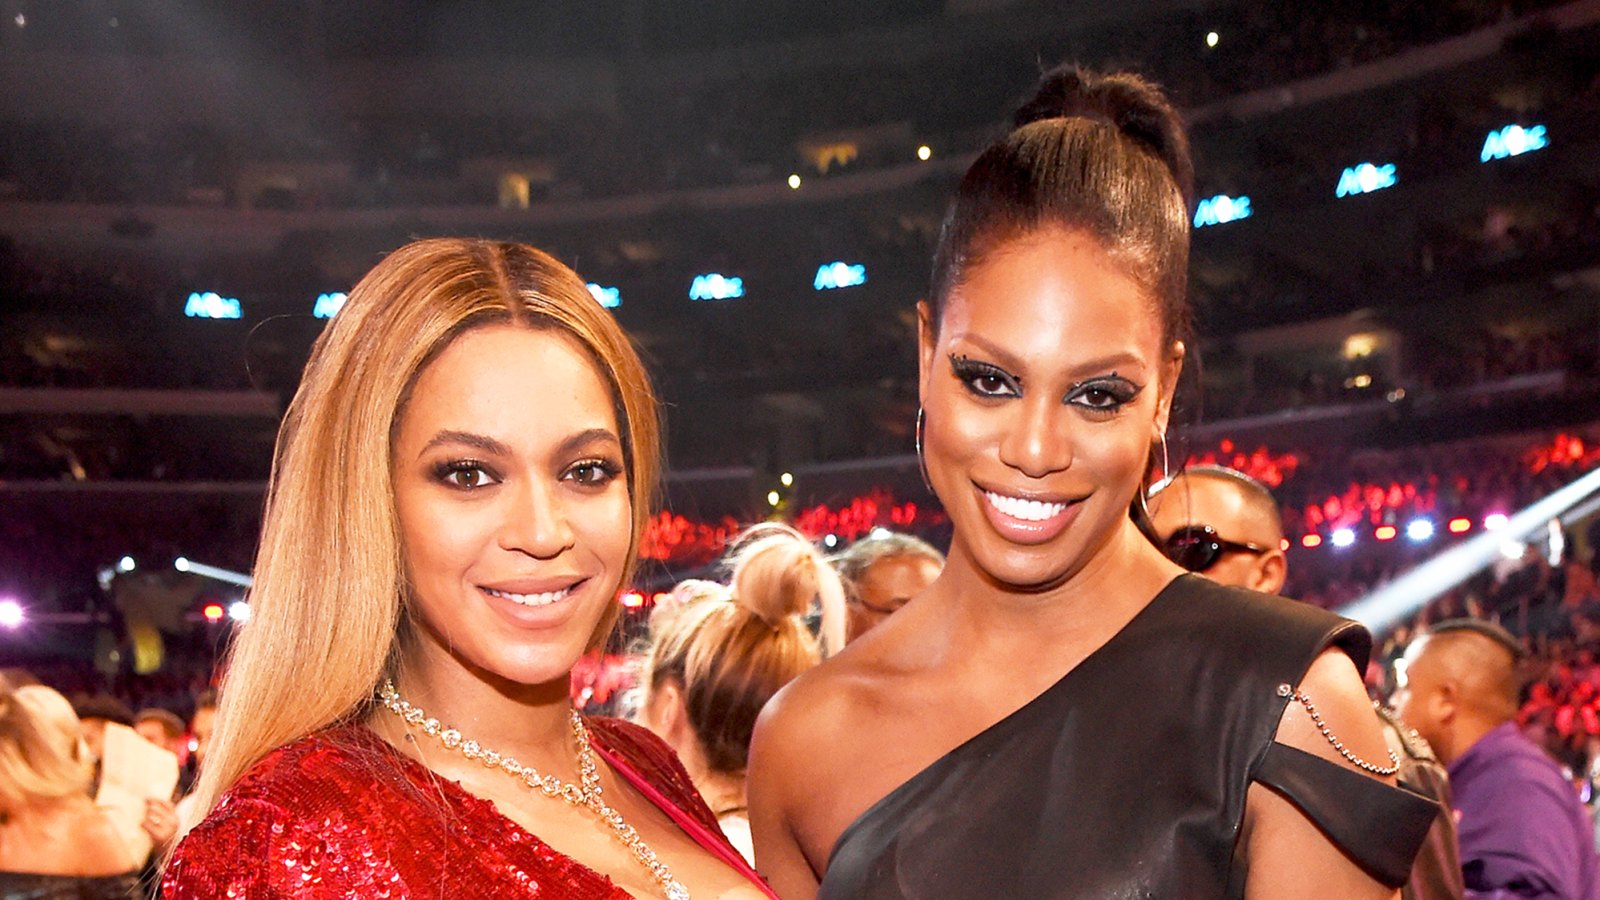 Beyonce and Laverne Cox during The 59th Grammy Awards at Staples Center in Los Angeles, California.